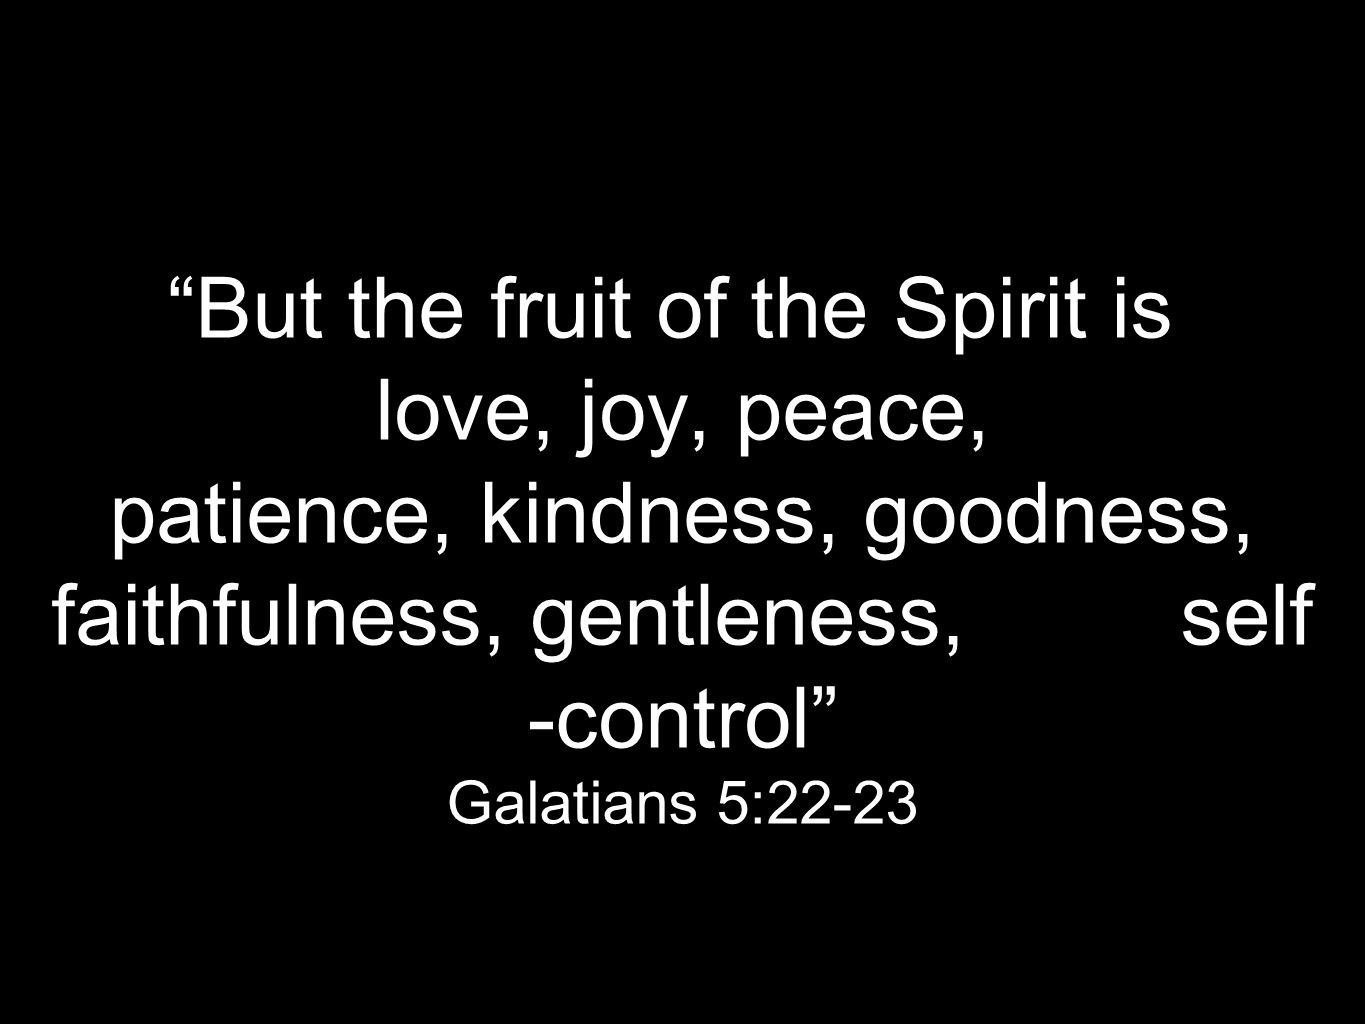 But the fruit of the Spirit is love, joy, peace, patience, kindness, goodness, faithfulness, gentleness, self -control Galatians 5:22-23